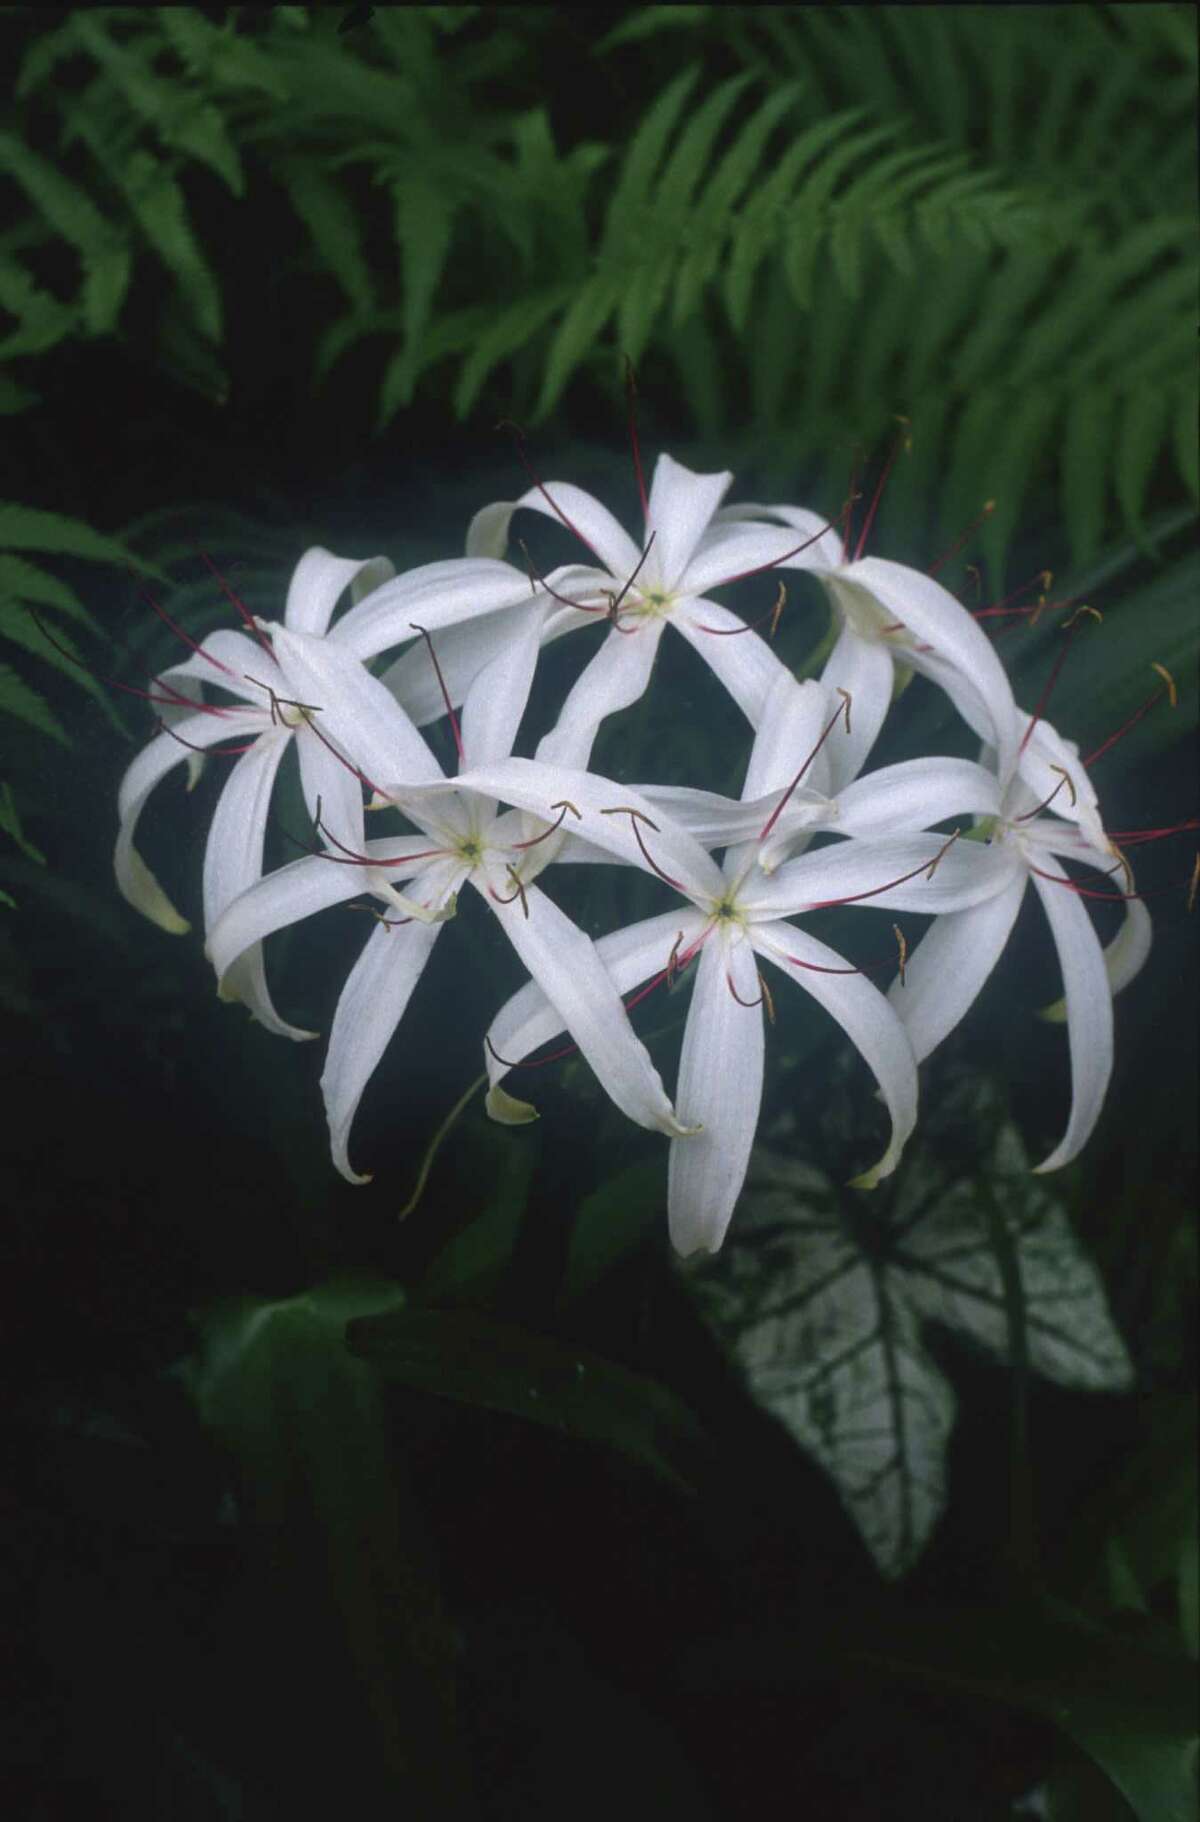 Swamp Lily. HOUSTON 7/24/99 - LAZY GARDENER HOUCHRON CAPTION (07/24/1999): "Crinum americana", the Texas swamp lilly, will take deeper shade than most crinums. It also does well in water and bog gardens.